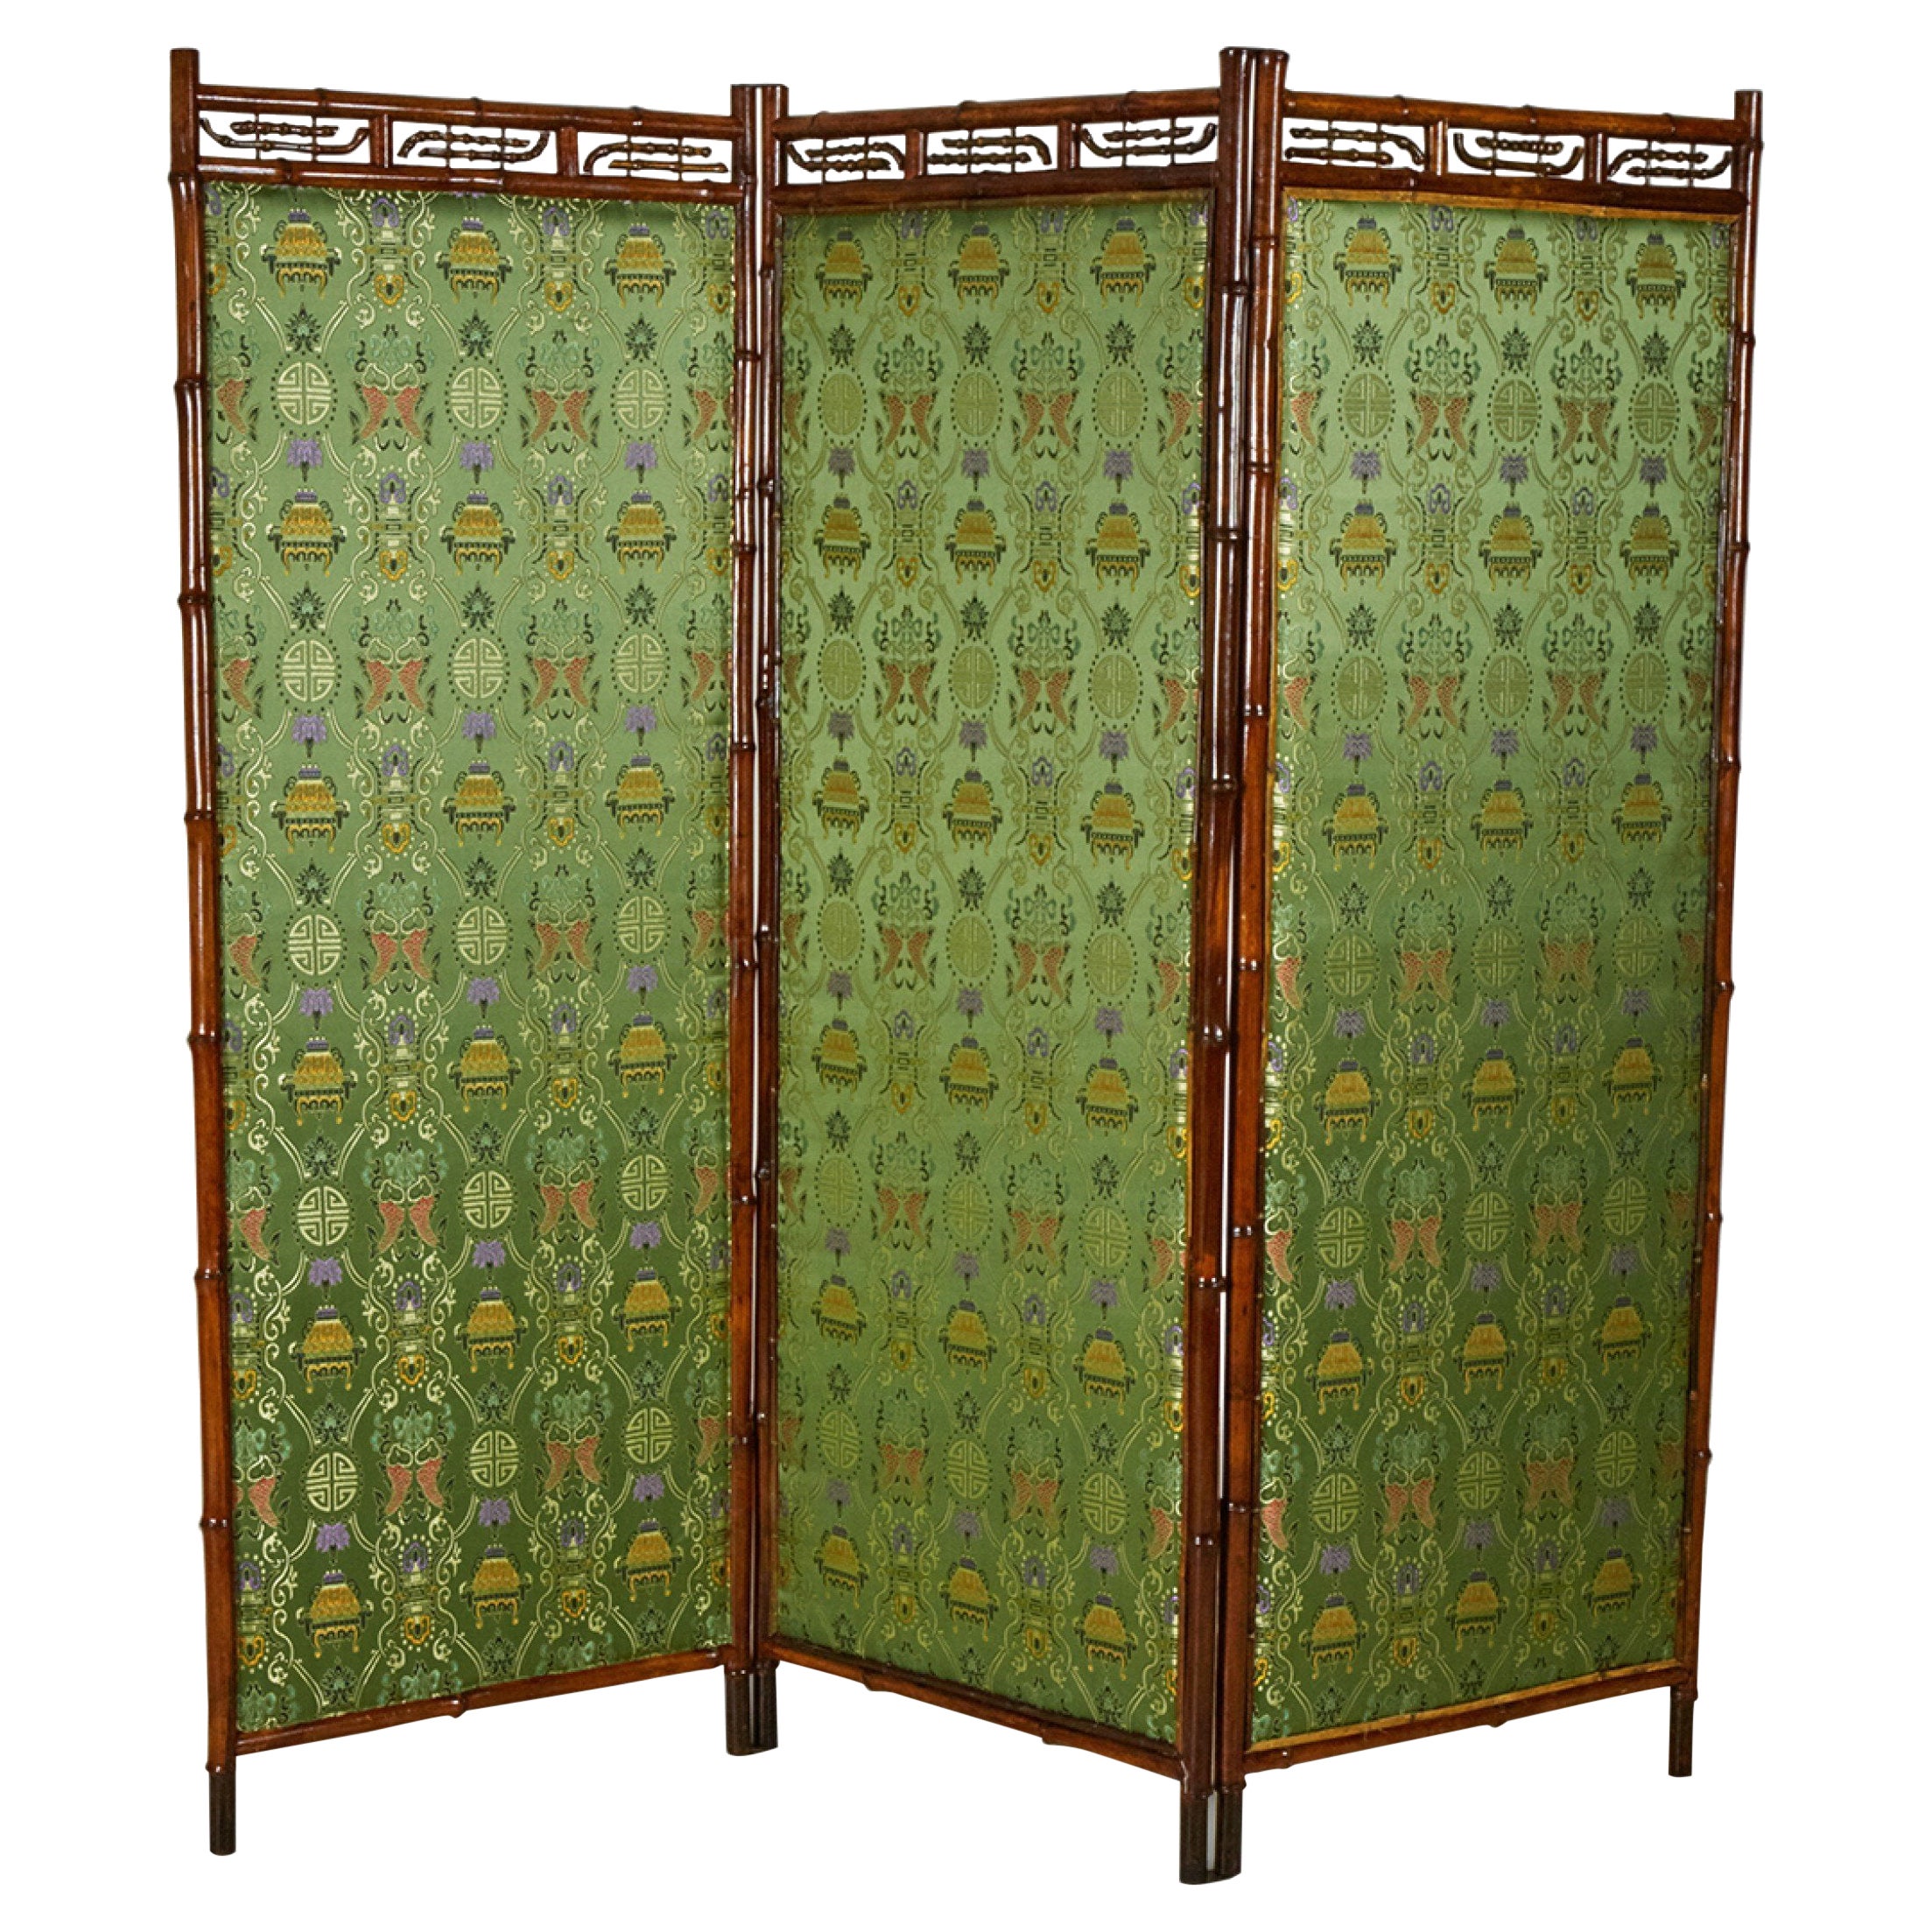 Victorian Bamboo 3-Fold Screen with Floral Green and Yellow Upholstered Panels